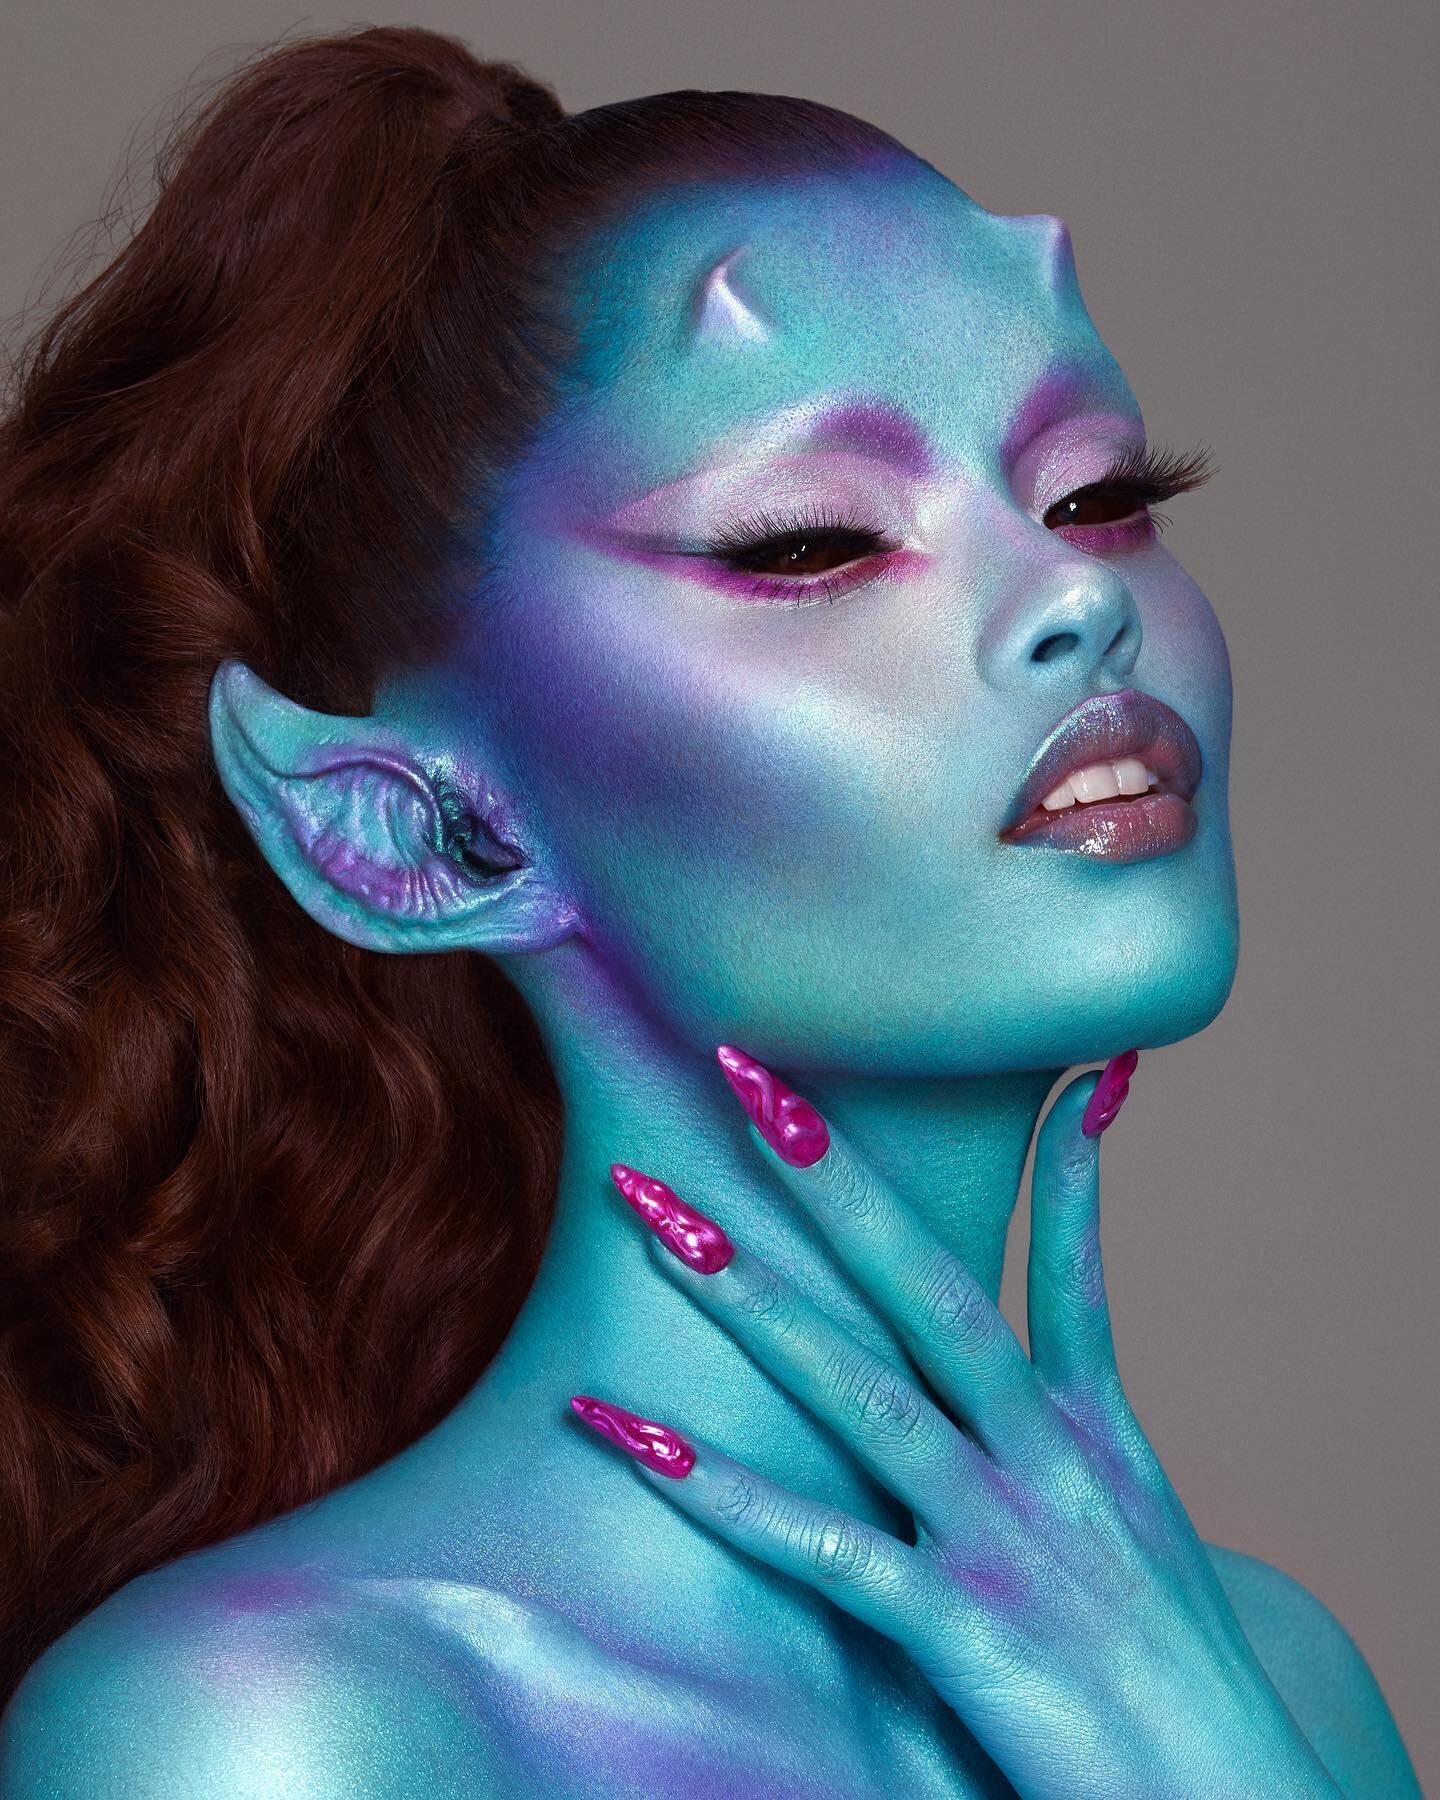 Alien makeup fun with @jayden_fa and @jhair_stylist featuring @janaskye_ 
Swipe to see her as she usually is! 
Makeup by me, assisted by @camilledelattre with nails by @emilygilmour.nails 

See my previous post for all the product details 

_________